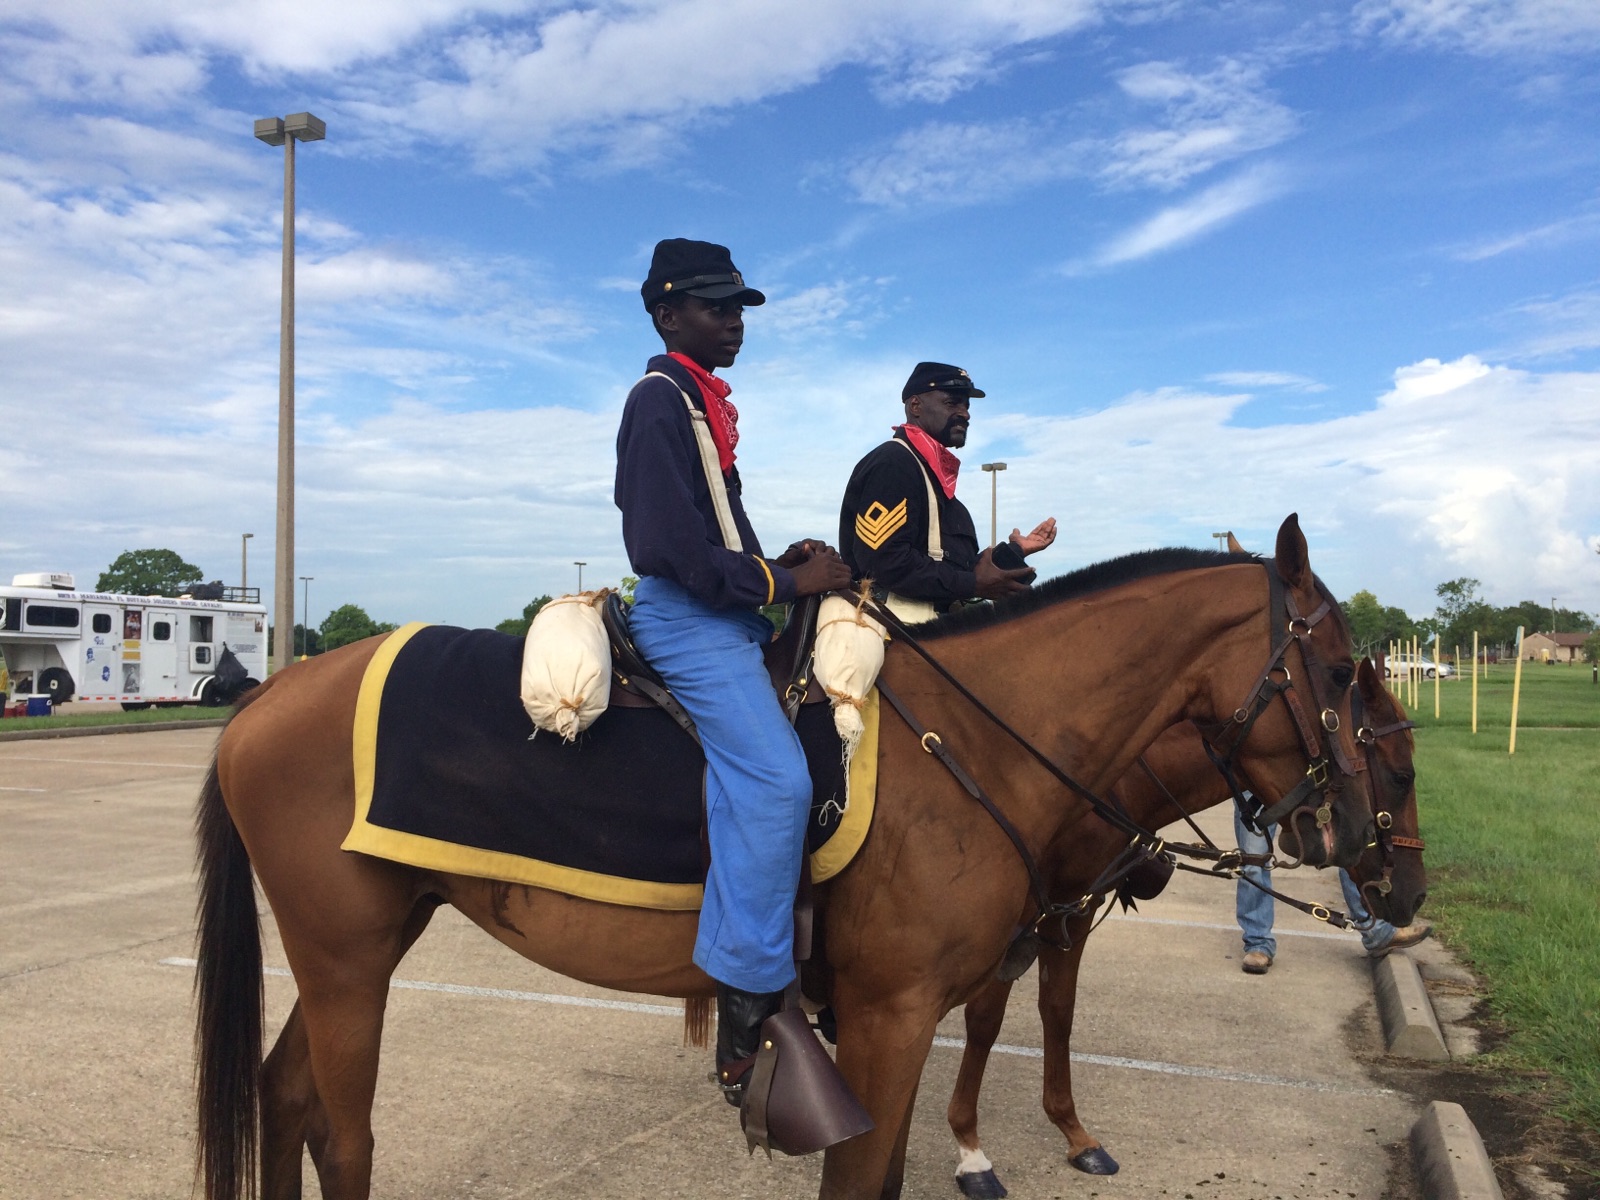 Riders from Pennsylvania taking part in Buffalo Soldiers commemoration